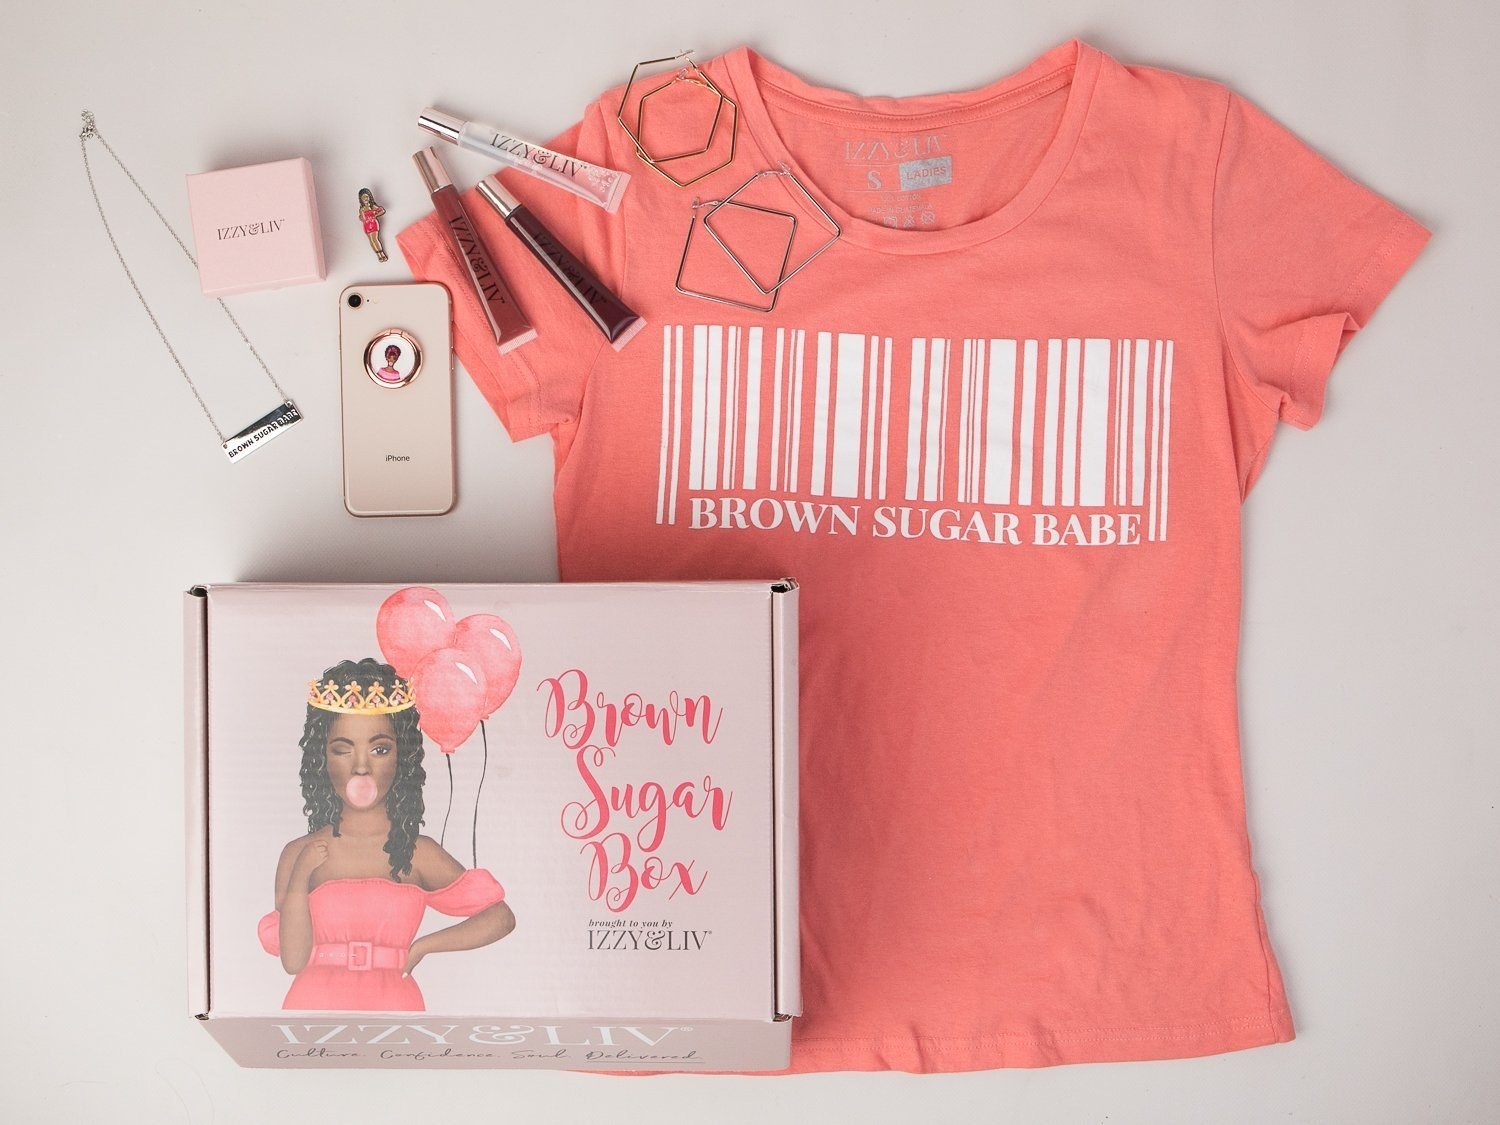 the box with a shirt that has a bar code on it and says &quot;Brown Sugar Babe&quot; with some jewelry and makeup